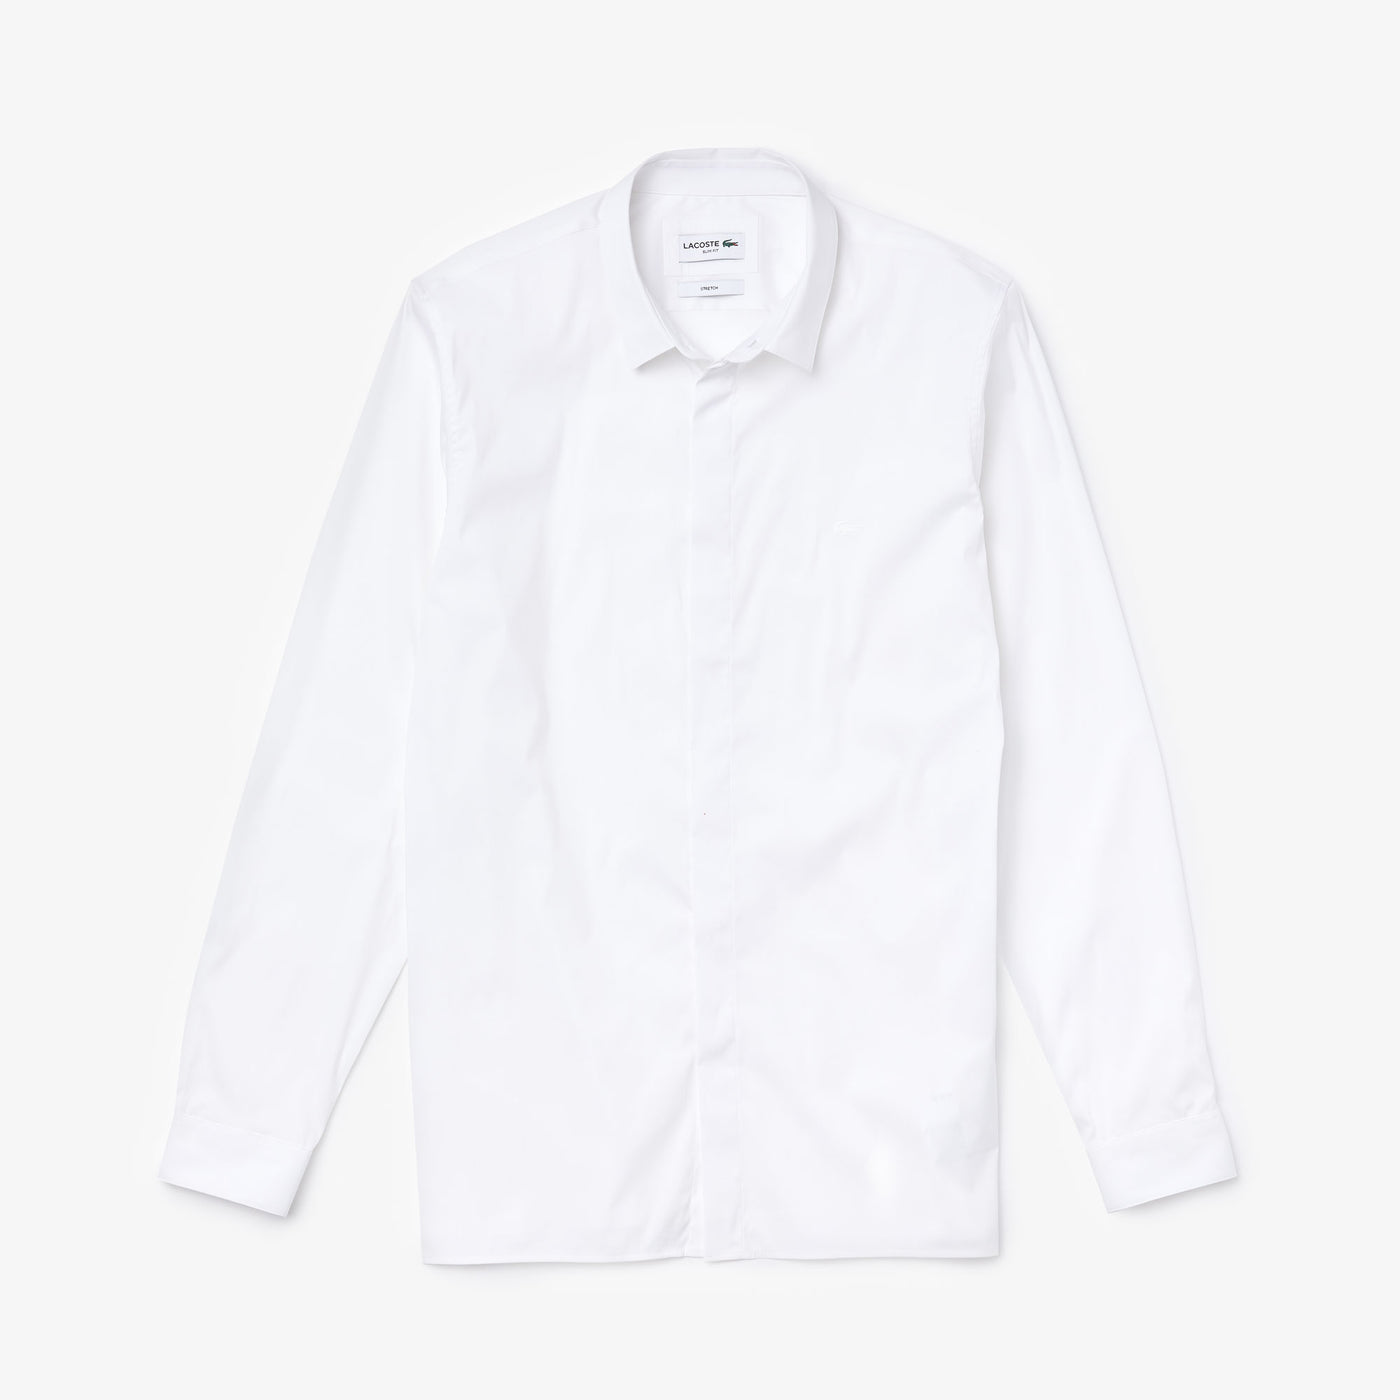 Shop The Latest Collection Of Outlet - Lacoste Men'S Slim Fit Bi-Material Stretch Poplin And Jersey Shirt - Ch9762 In Lebanon